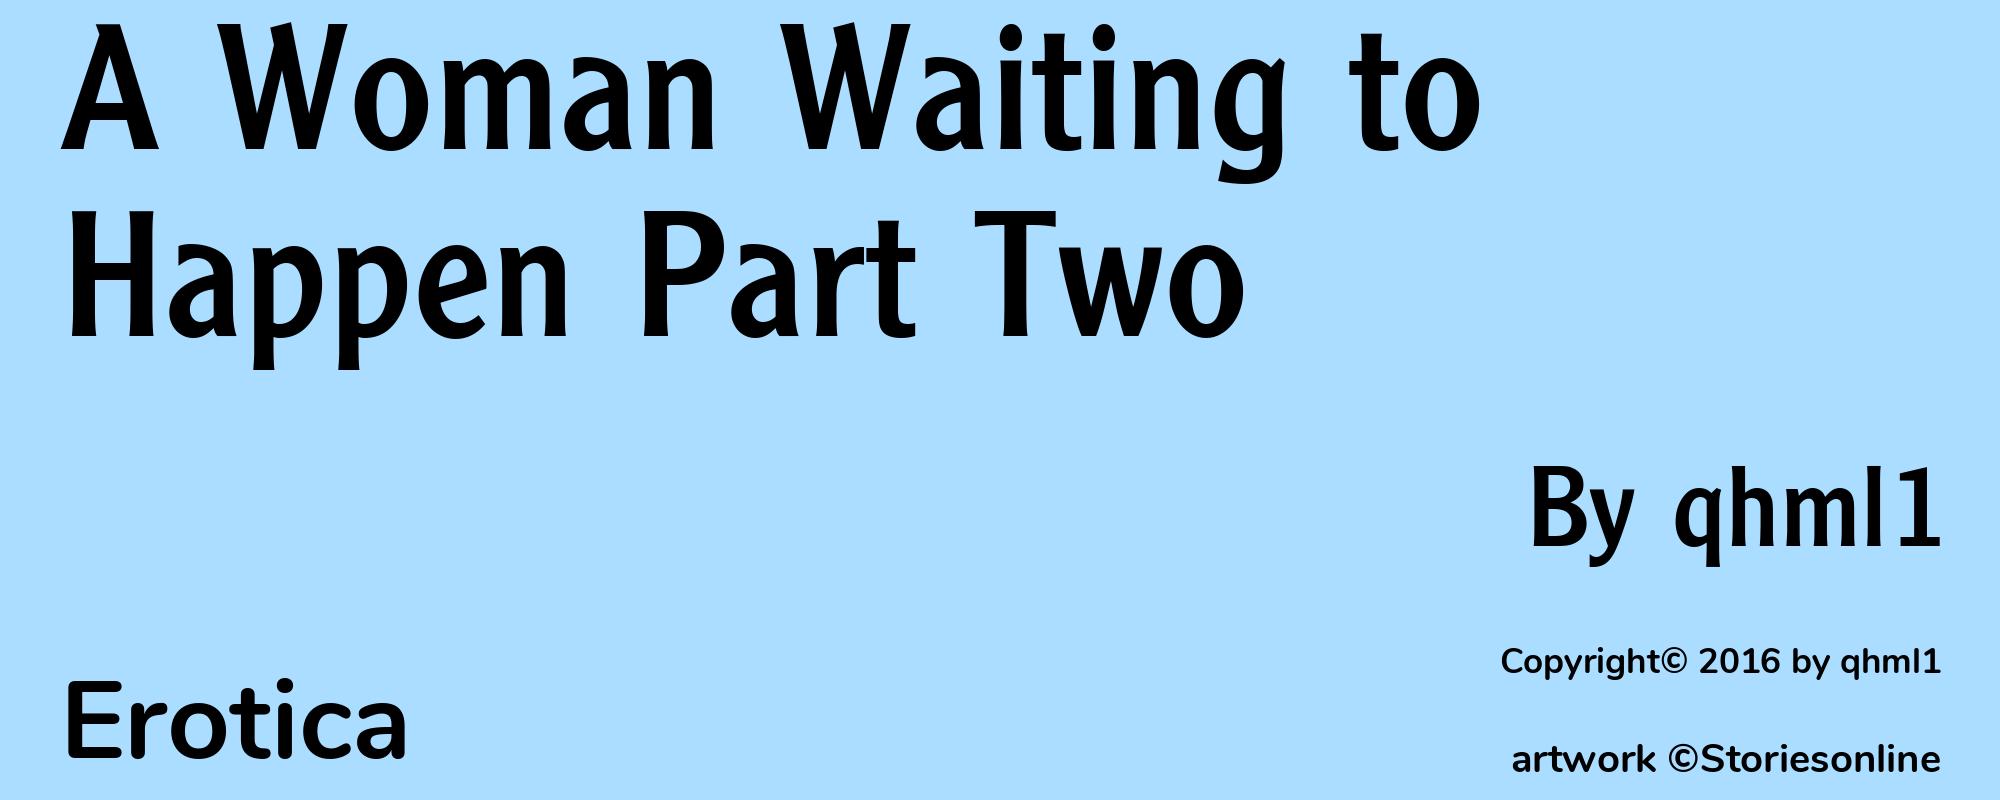 A Woman Waiting to Happen Part Two - Cover